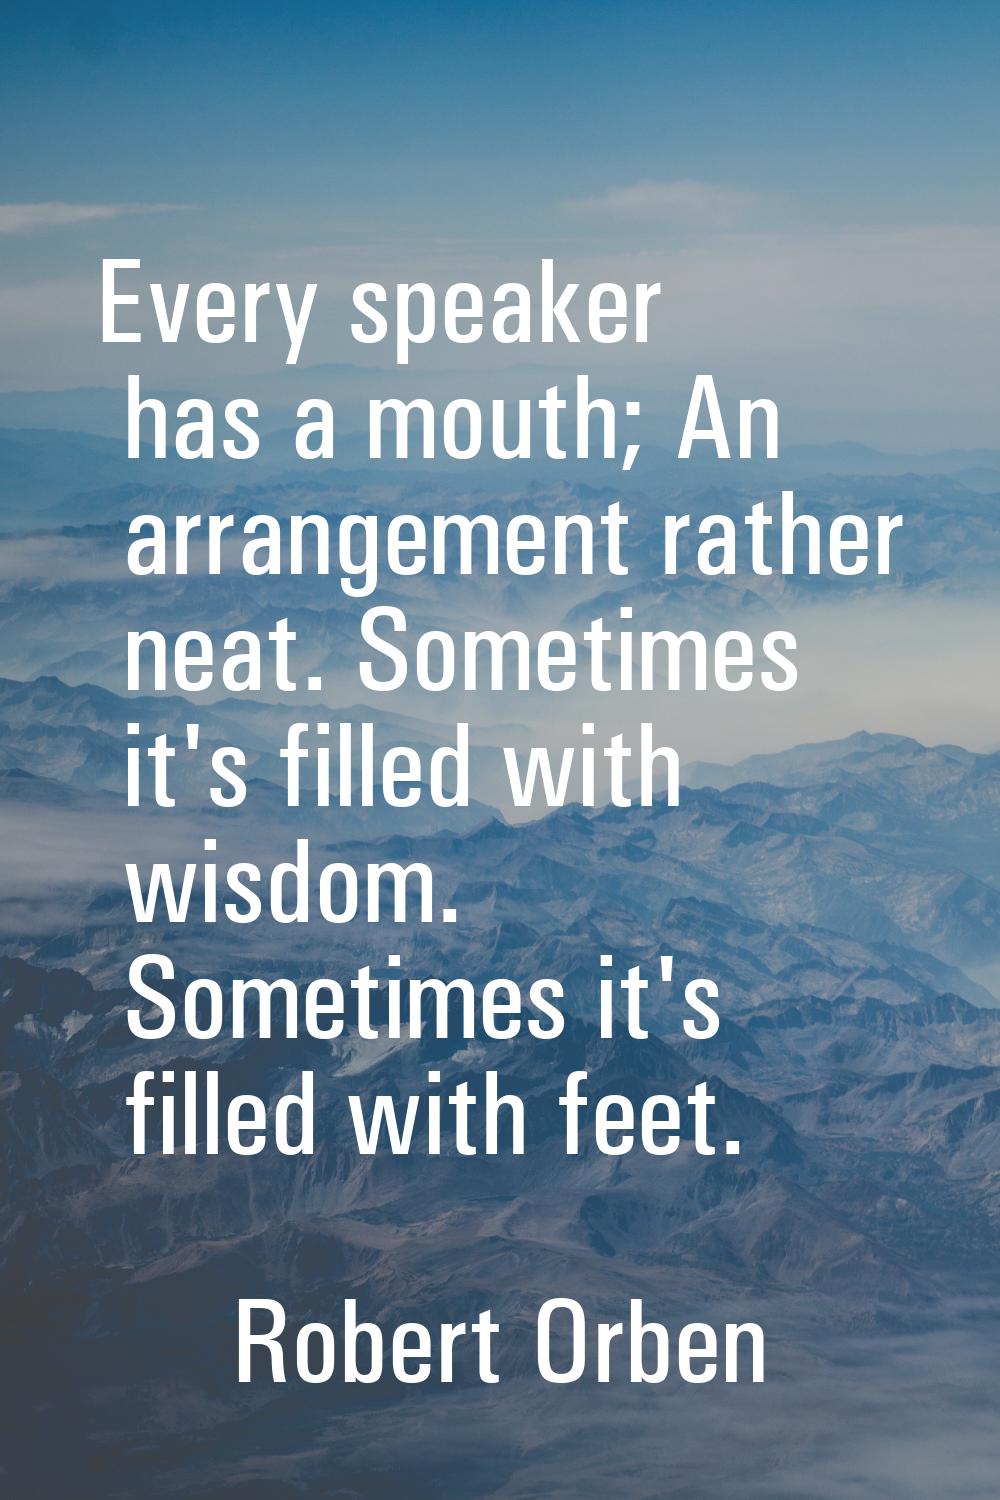 Every speaker has a mouth; An arrangement rather neat. Sometimes it's filled with wisdom. Sometimes